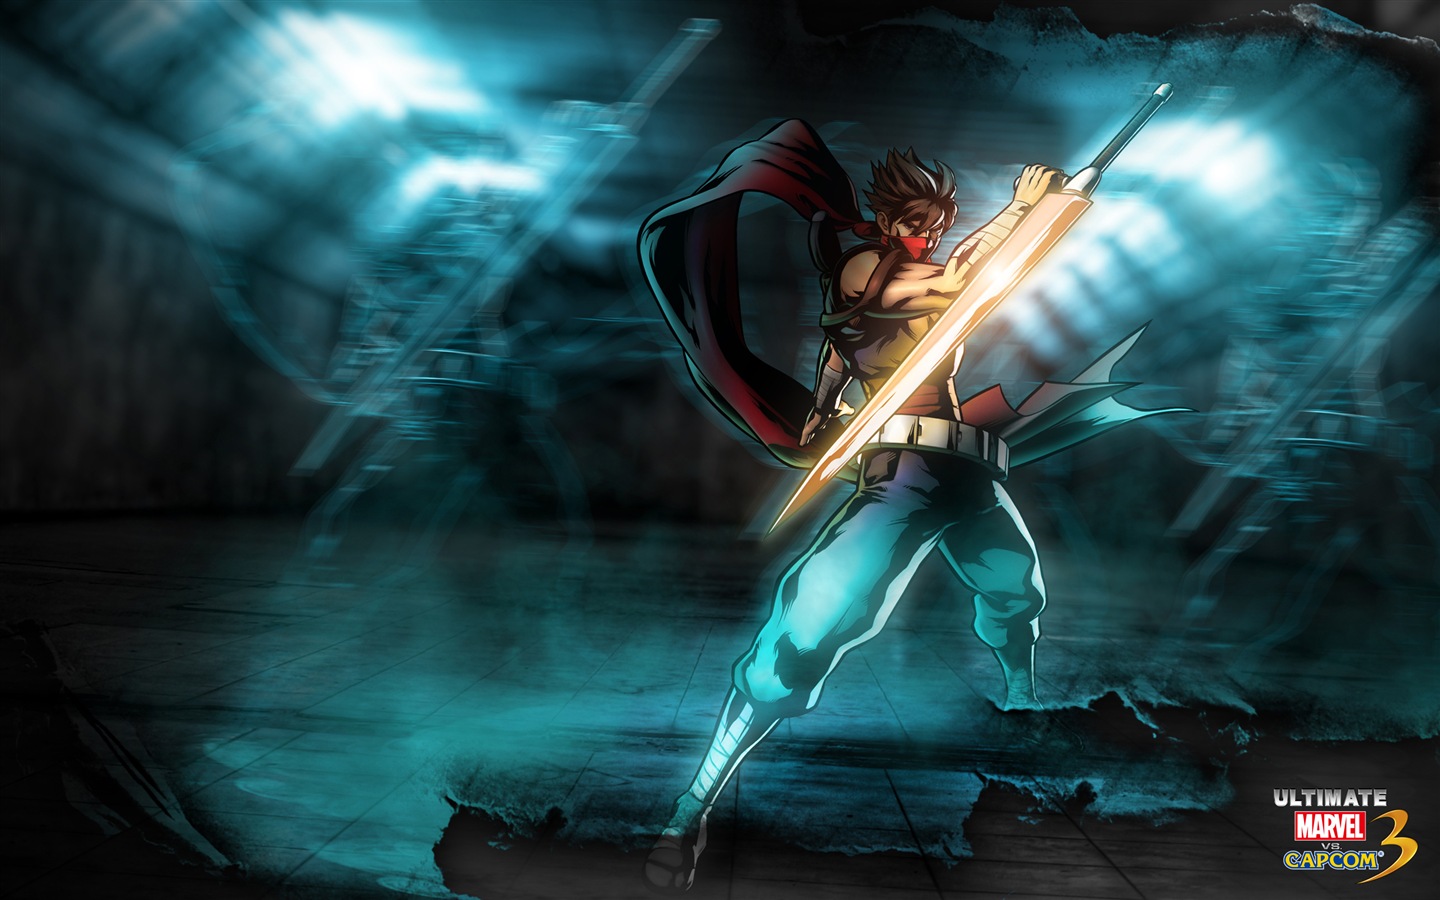 Marvel VS. Capcom 3: Fate of Two Worlds HD game wallpapers #23 - 1440x900